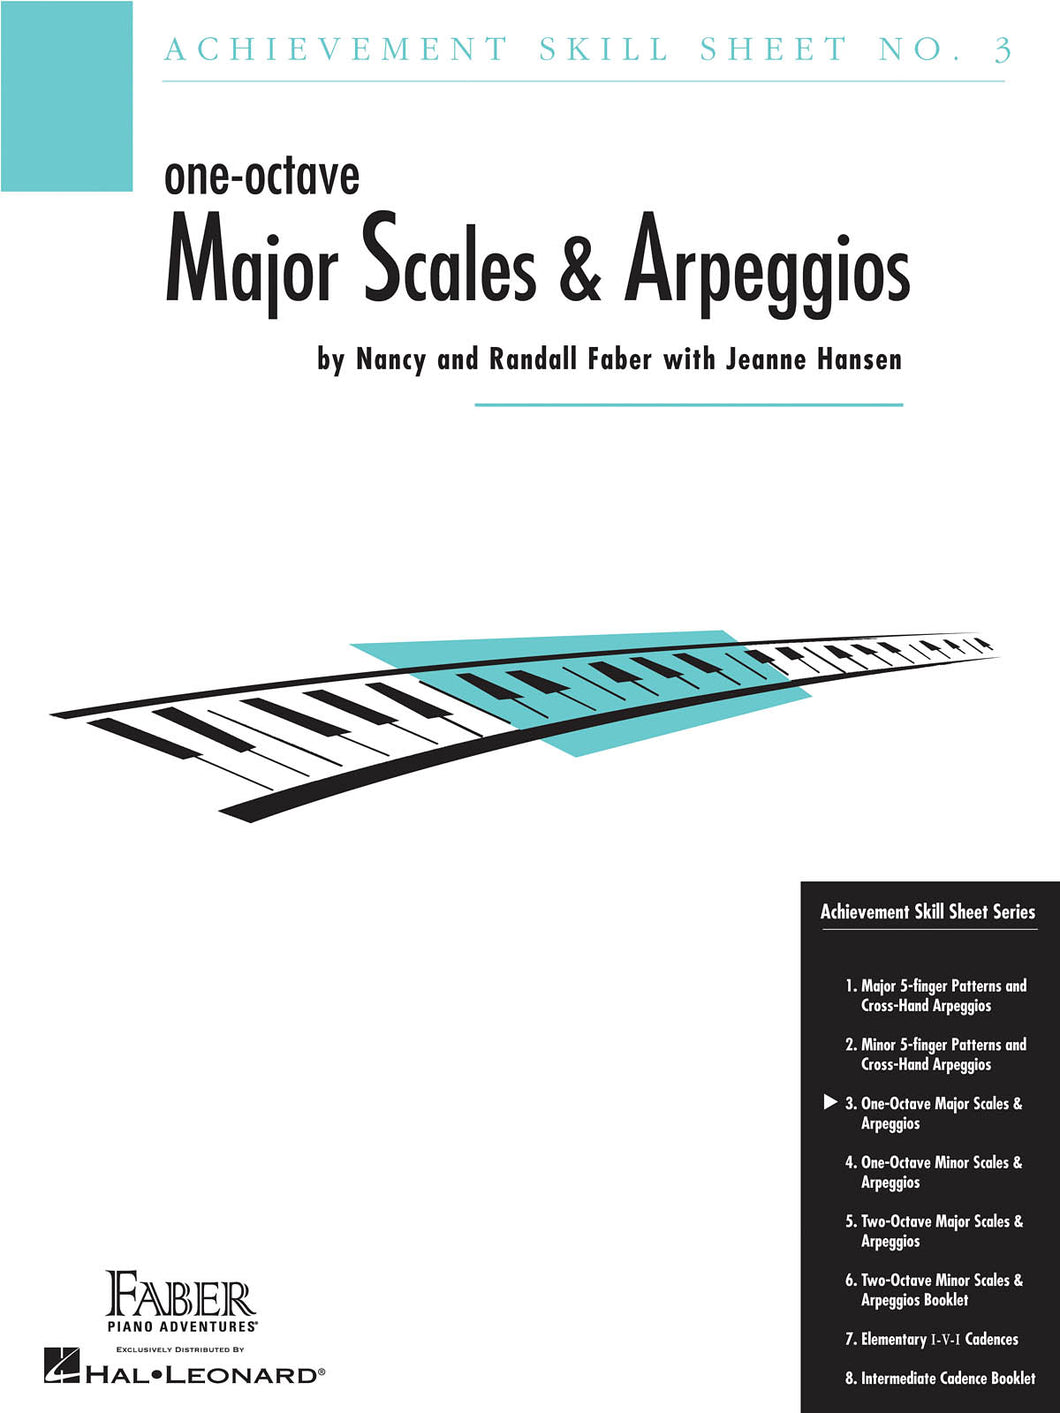 Faber Achievement Skill Sheet No. 3 - One Octave Arpeggios Major Scales